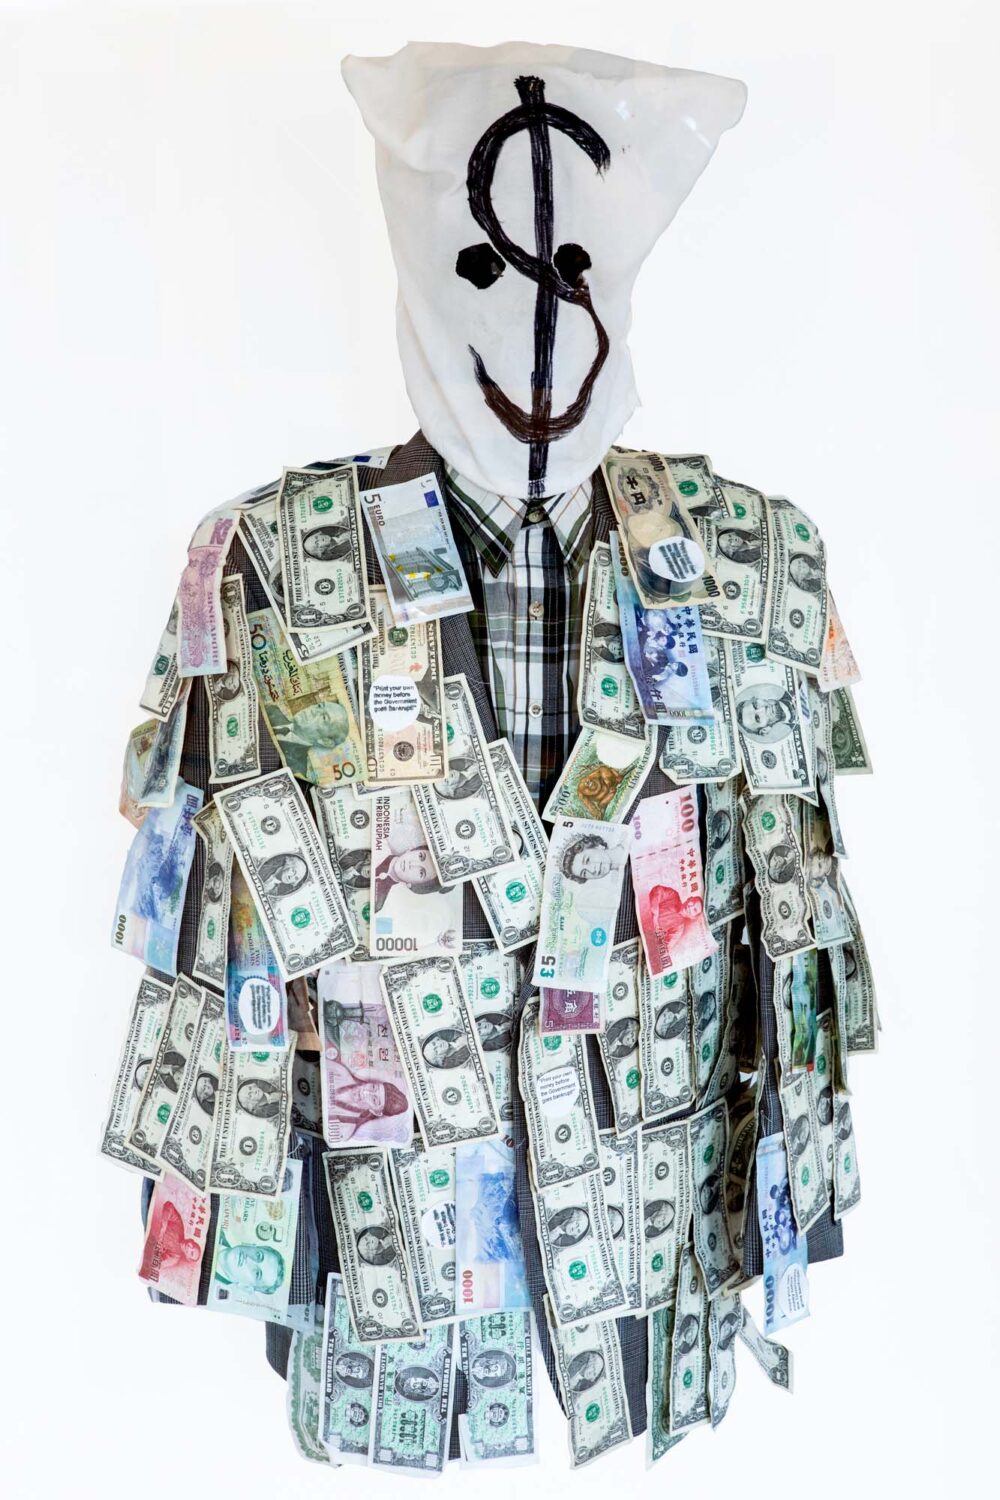 thumbnail of Recycled clothing, international currency, burlap sack, ink by Chin Chih Yang titled Free Money.